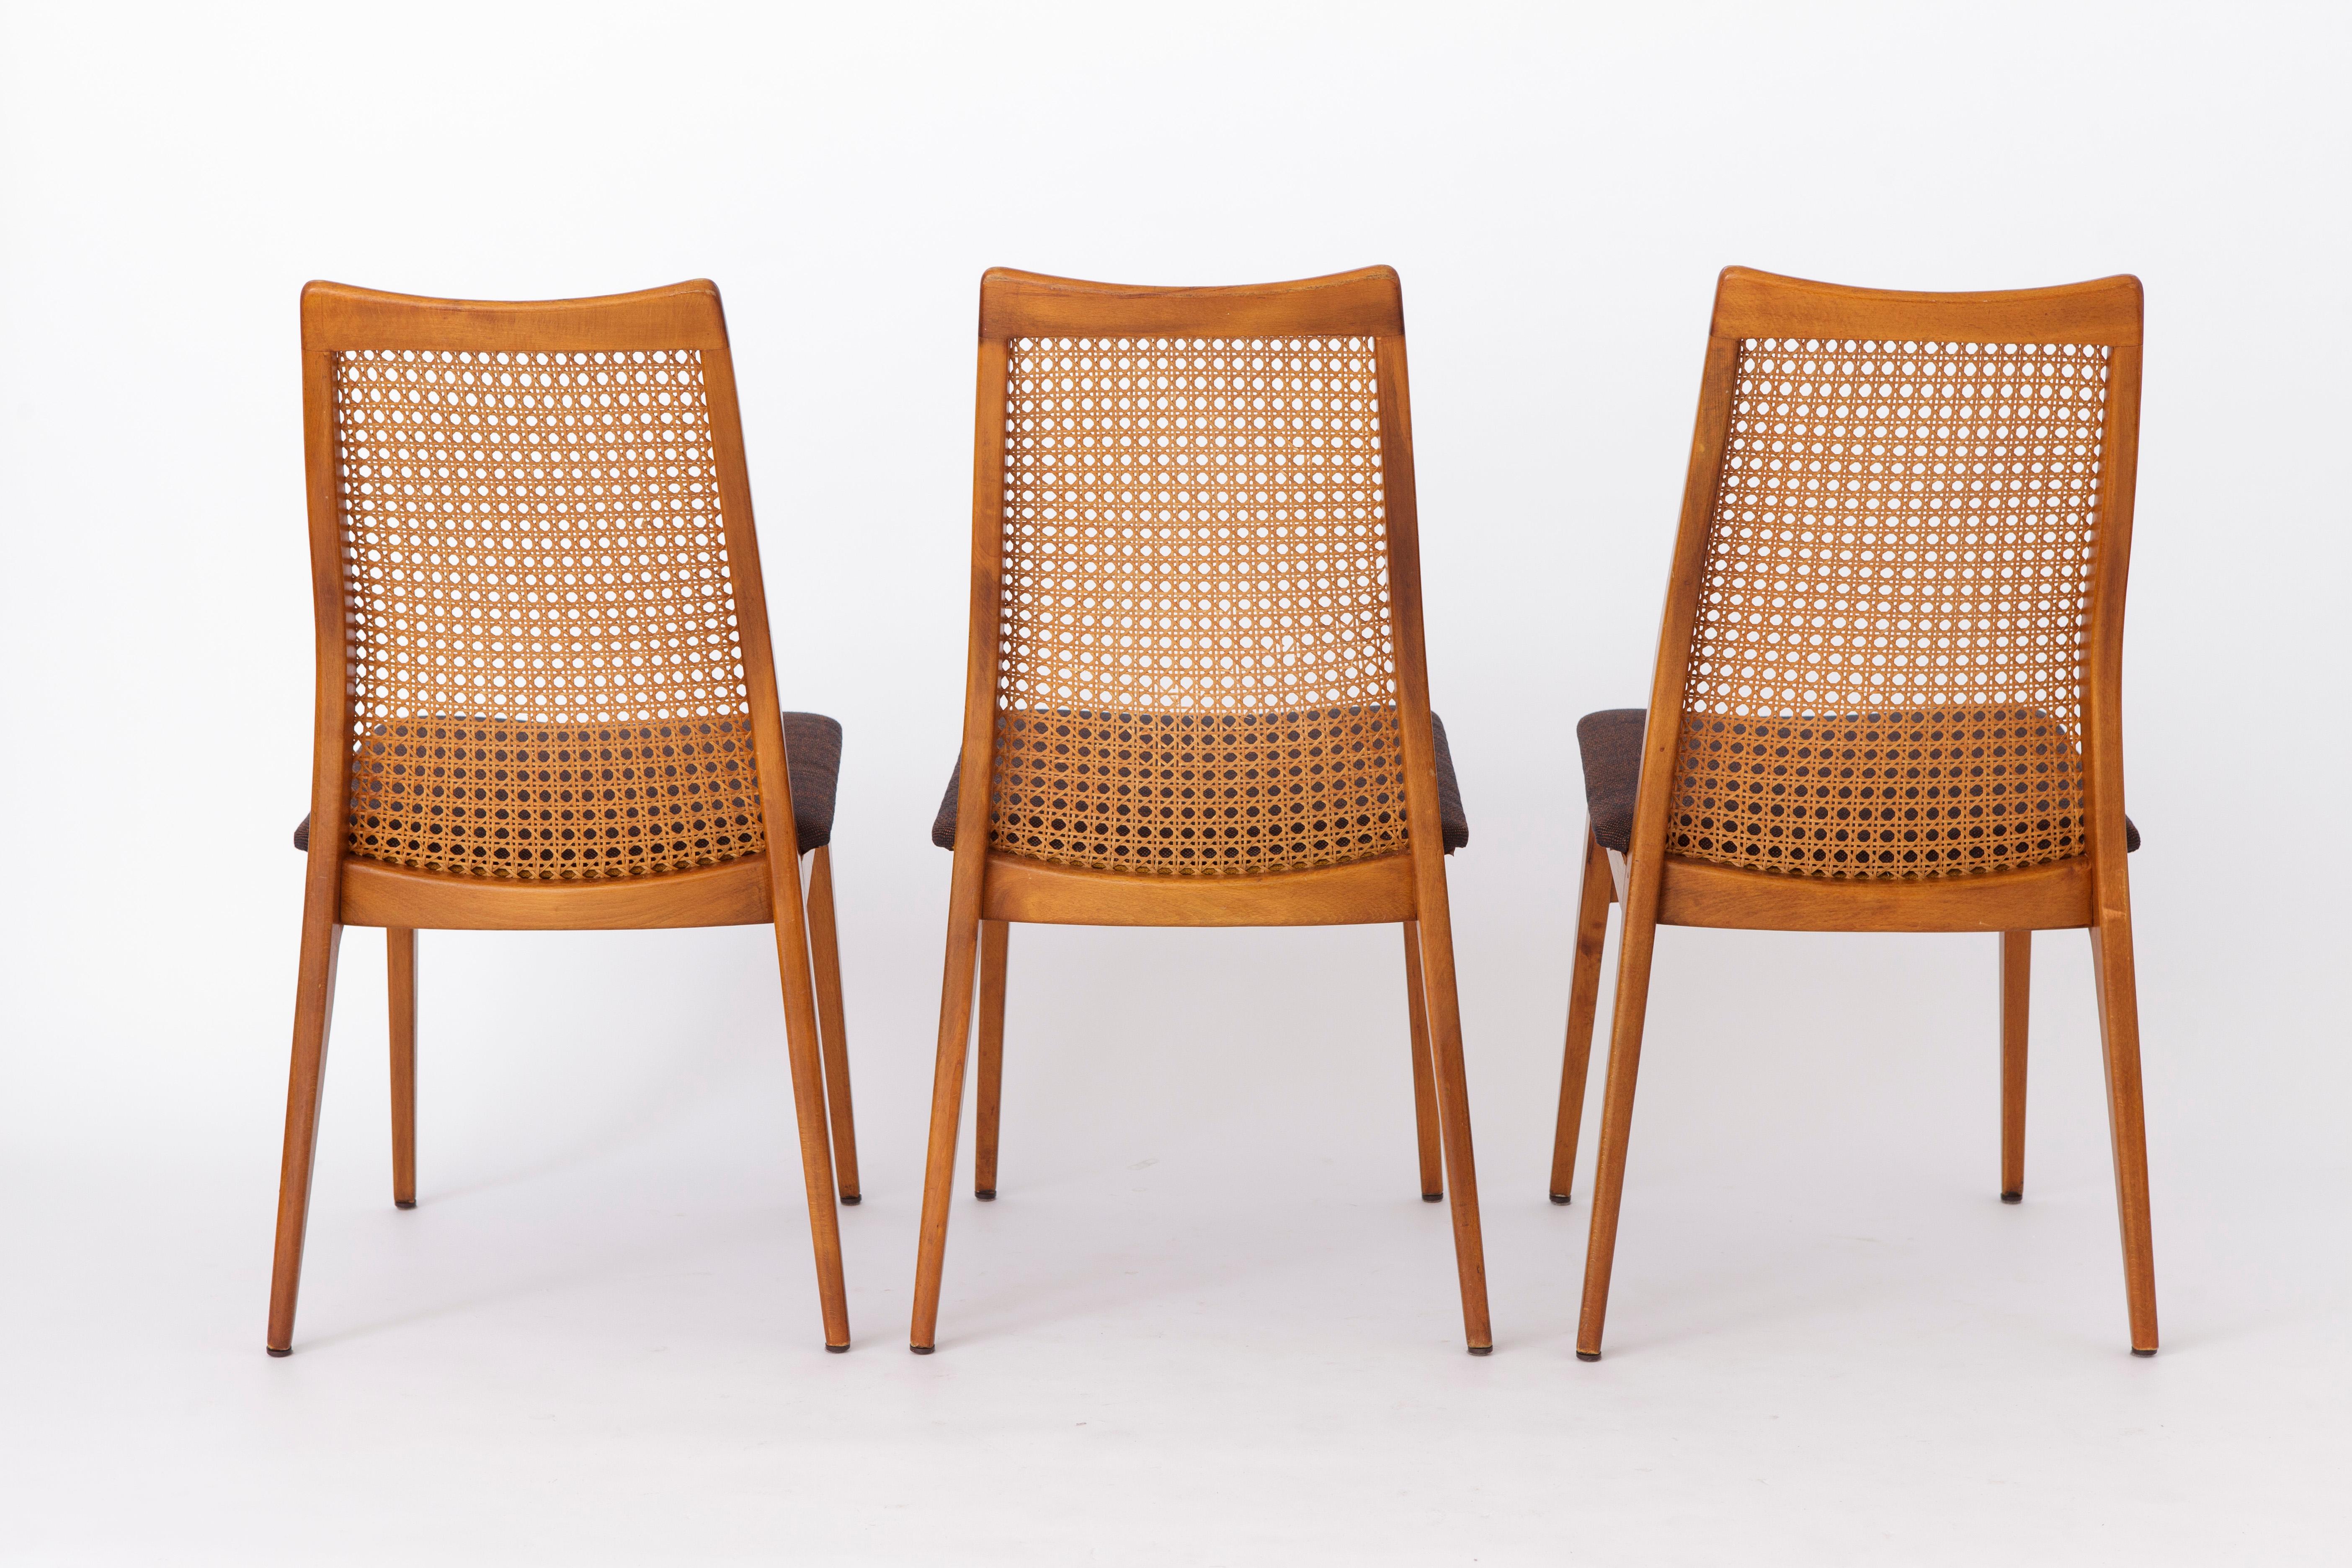 Polished 3 Vintage Chairs 1960s Germany by Wilhelm Benze For Sale